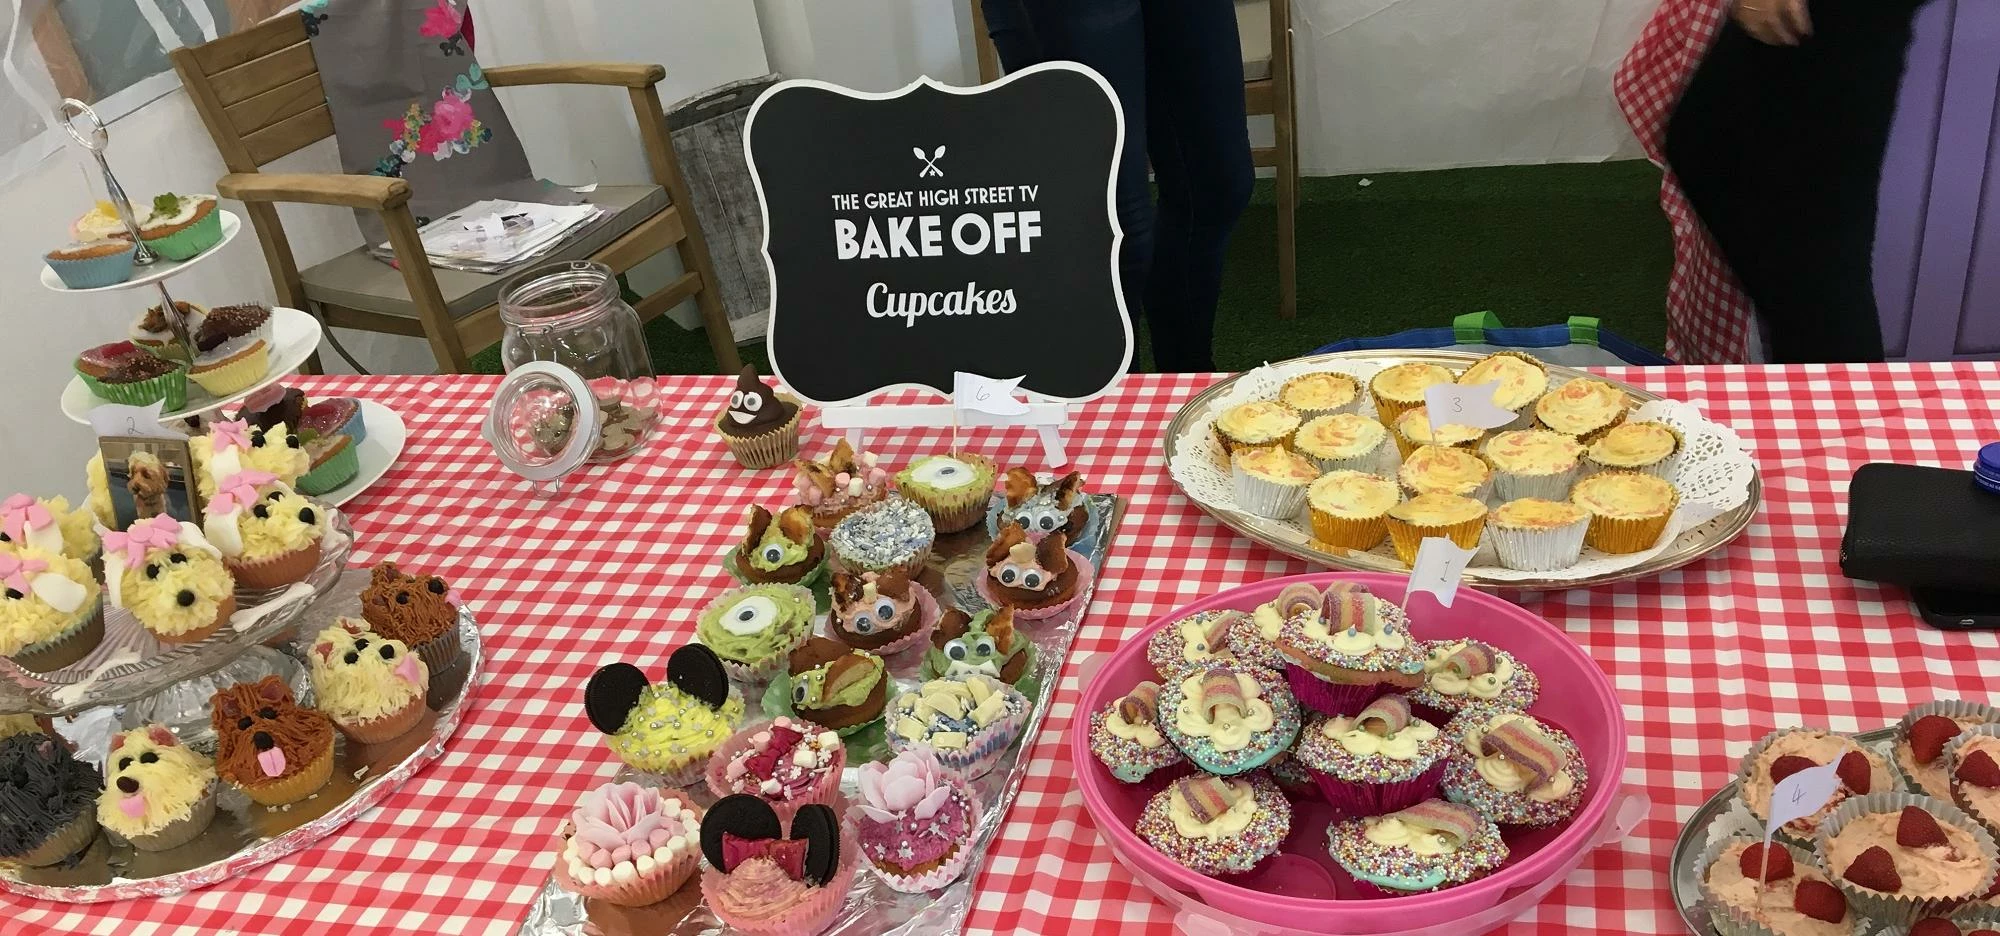 A selection of the delicious treats for sale at the High Street TV Bake Off